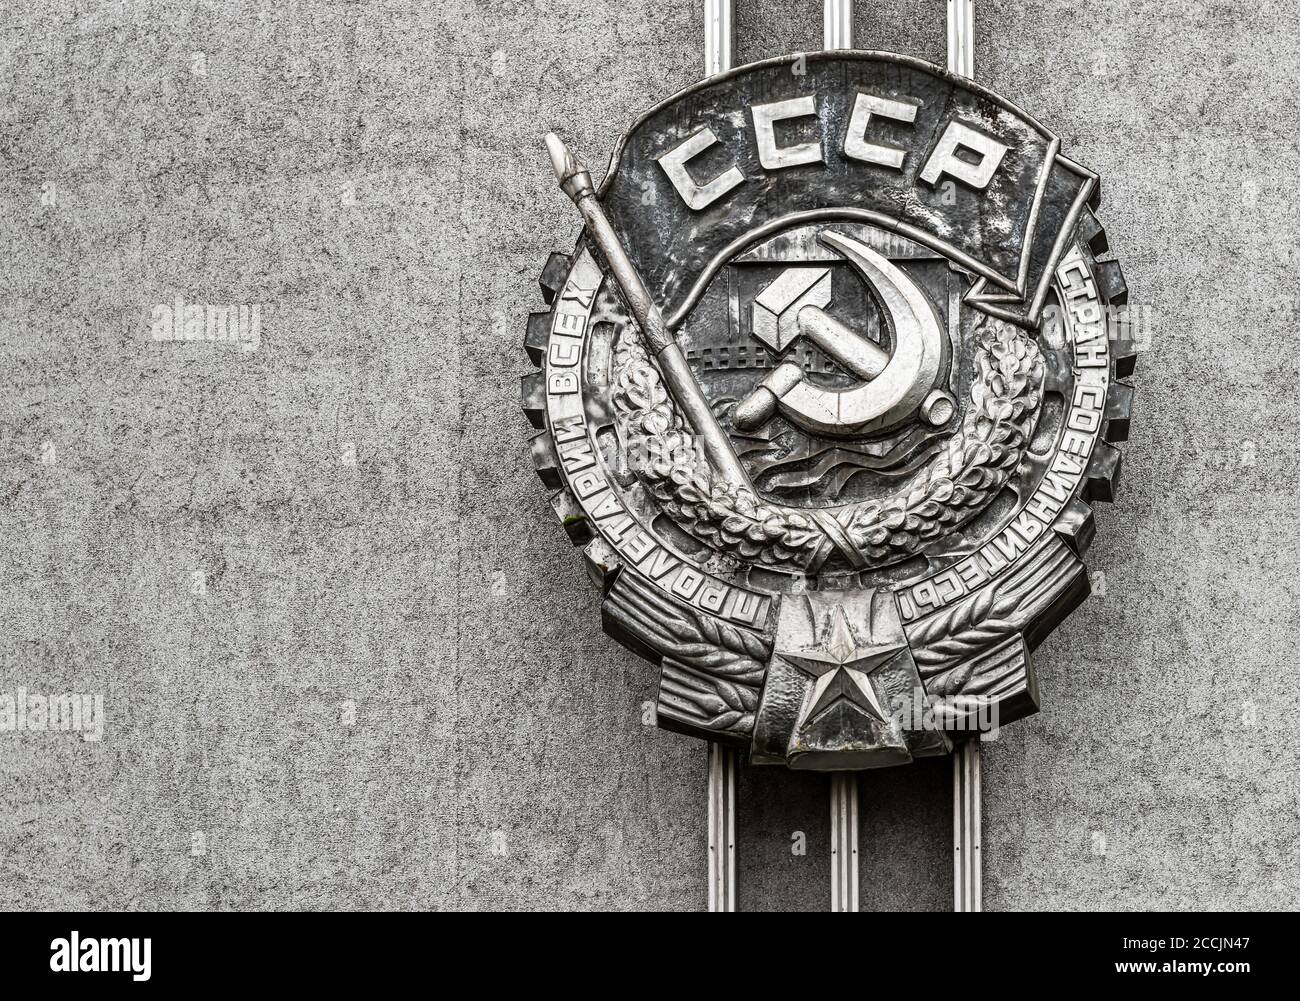 Emblem of the Soviet Union, sickle and hammer Soviet Union nation symbol on the stone wall. Stock Photo